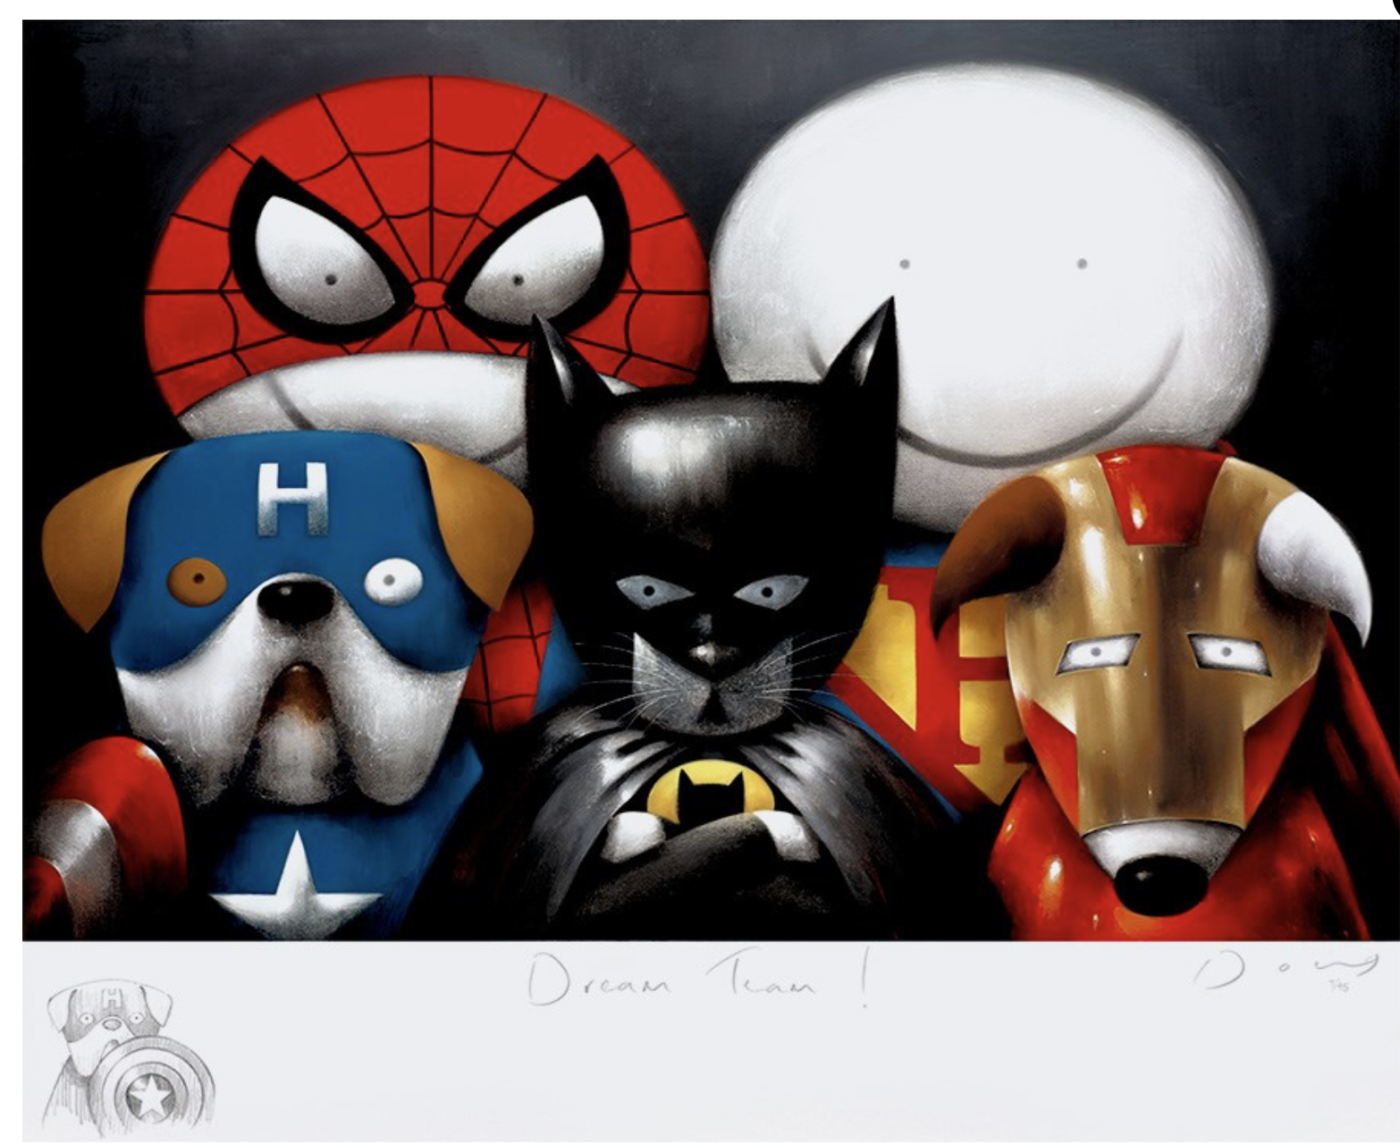 Buy Limited Edition Prints by Doug Hyde